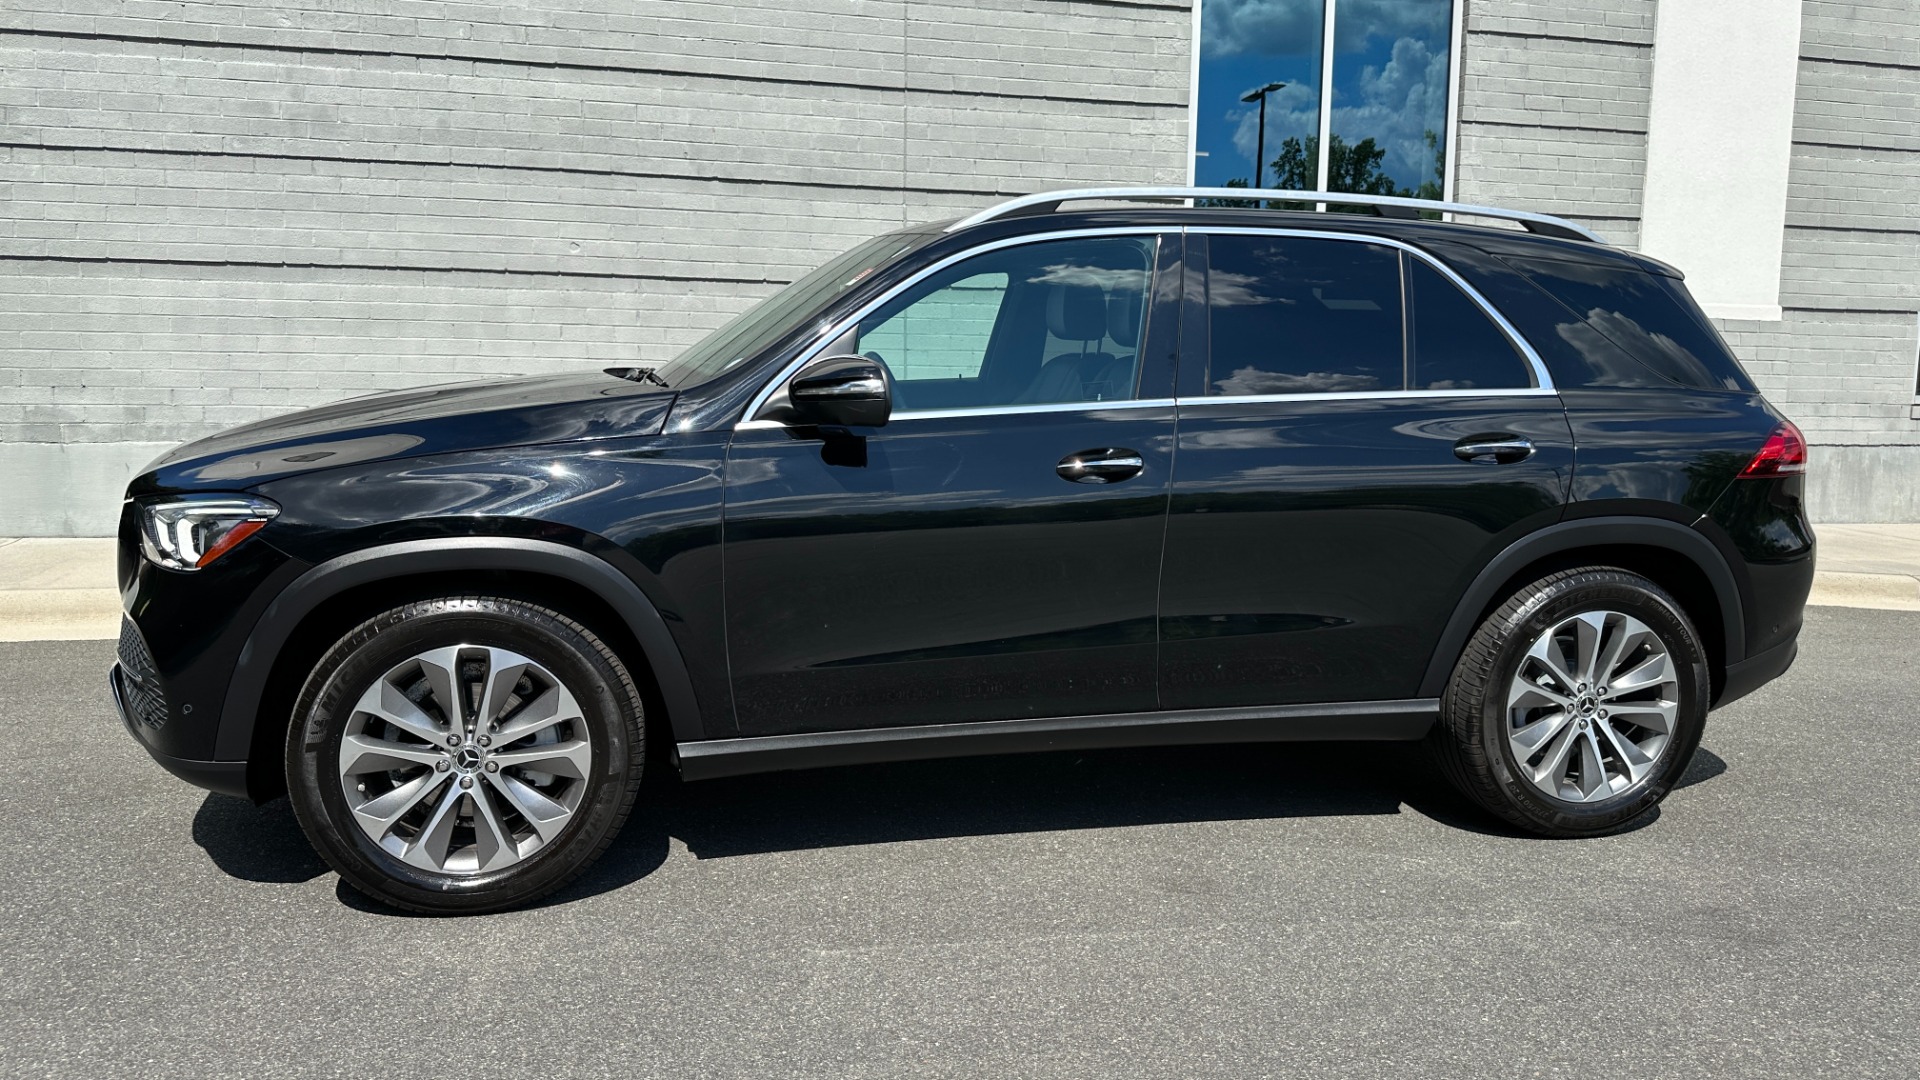 Used 2020 Mercedes-Benz GLE GLE 350 / 20IN WHEELS / NAV / BURMESTER / PREMIUM / PARKING ASSIST for sale $52,995 at Formula Imports in Charlotte NC 28227 3